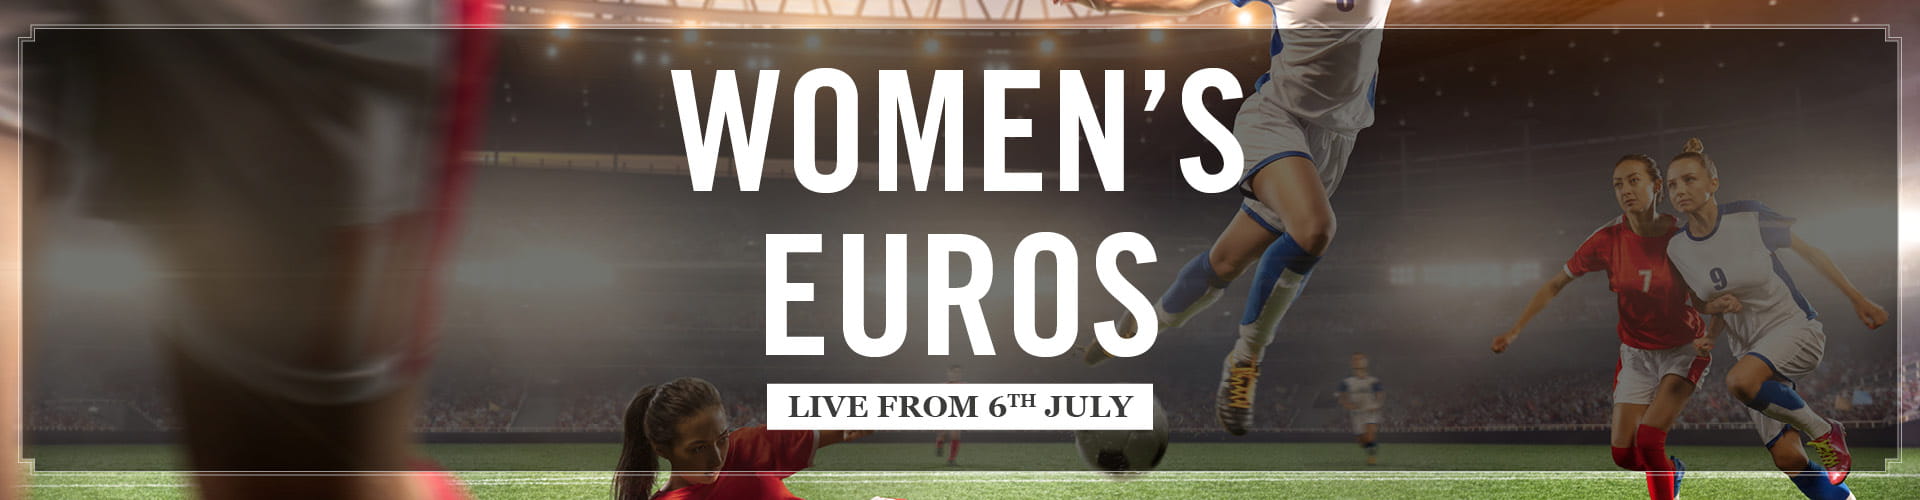 Watch Women's Euros 2022 live at your local pub | City Taverns